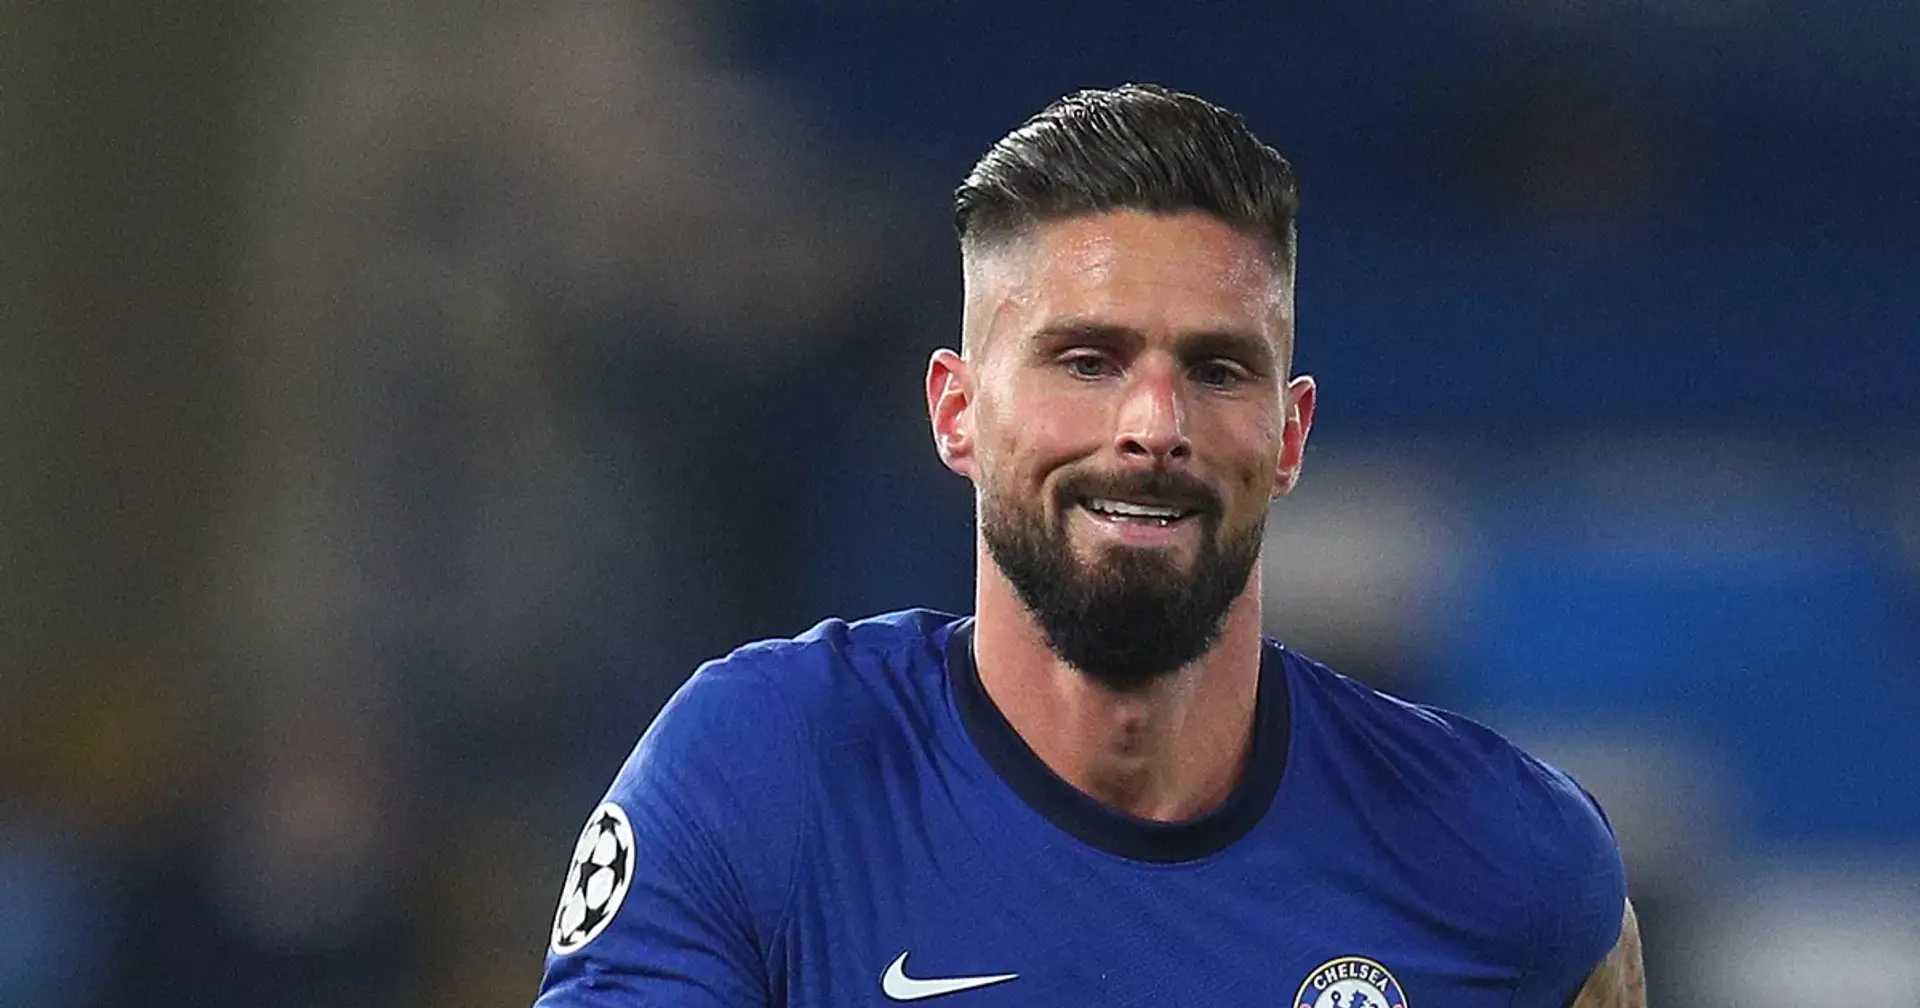 Sky Sports: Olivier Giroud features on Juventus' January shortlist (reliability: 4 stars)